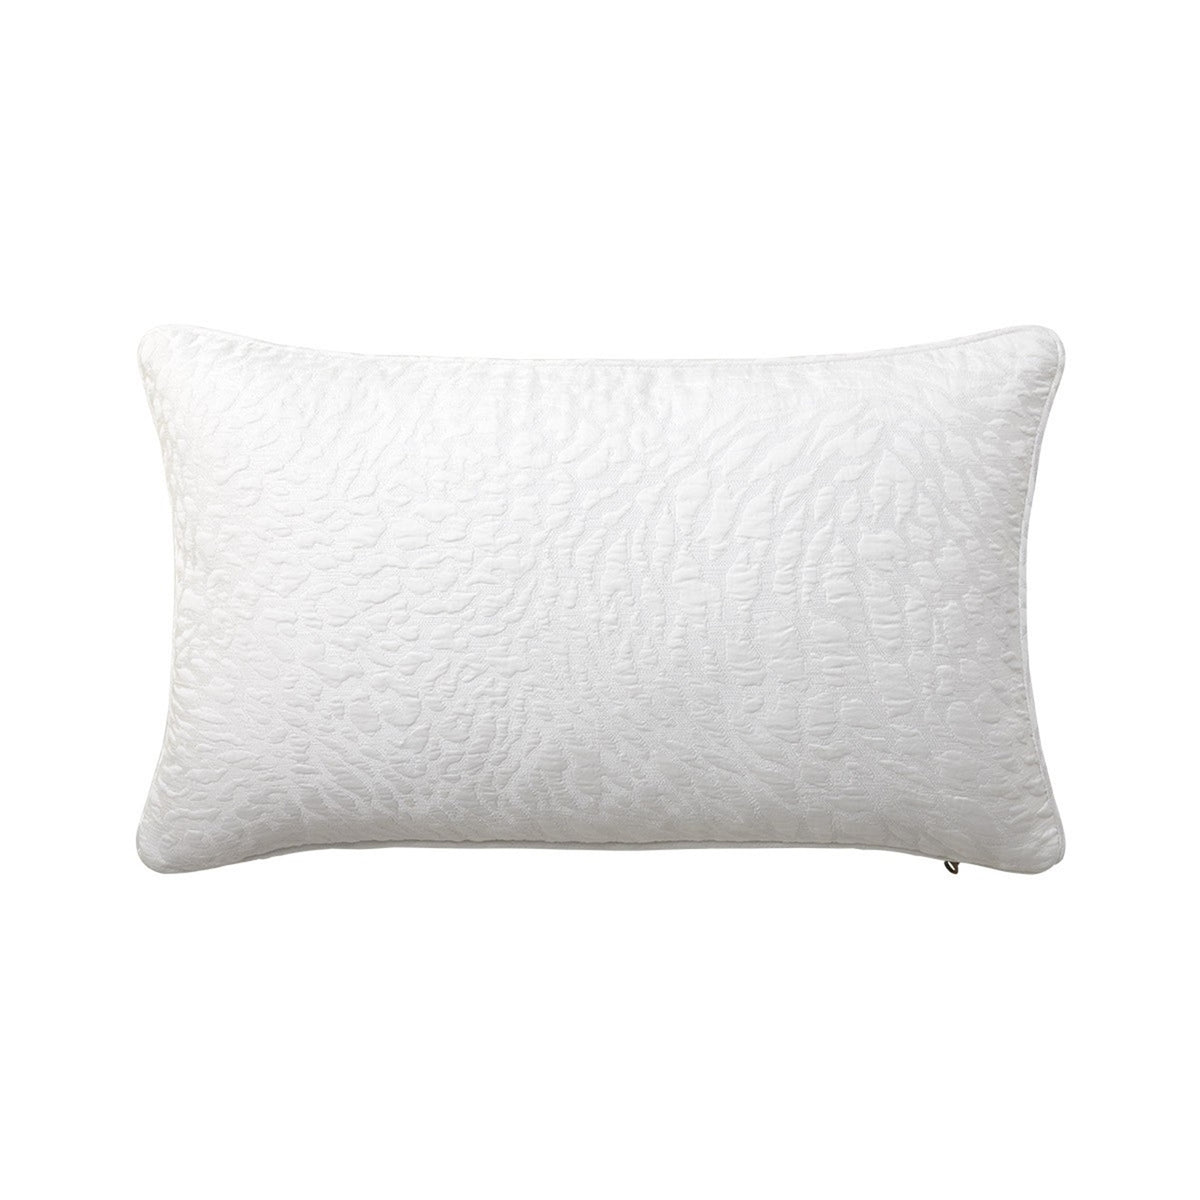 Front View of Yves Delorme Souvenir Decorative Pillow in Blanc Color